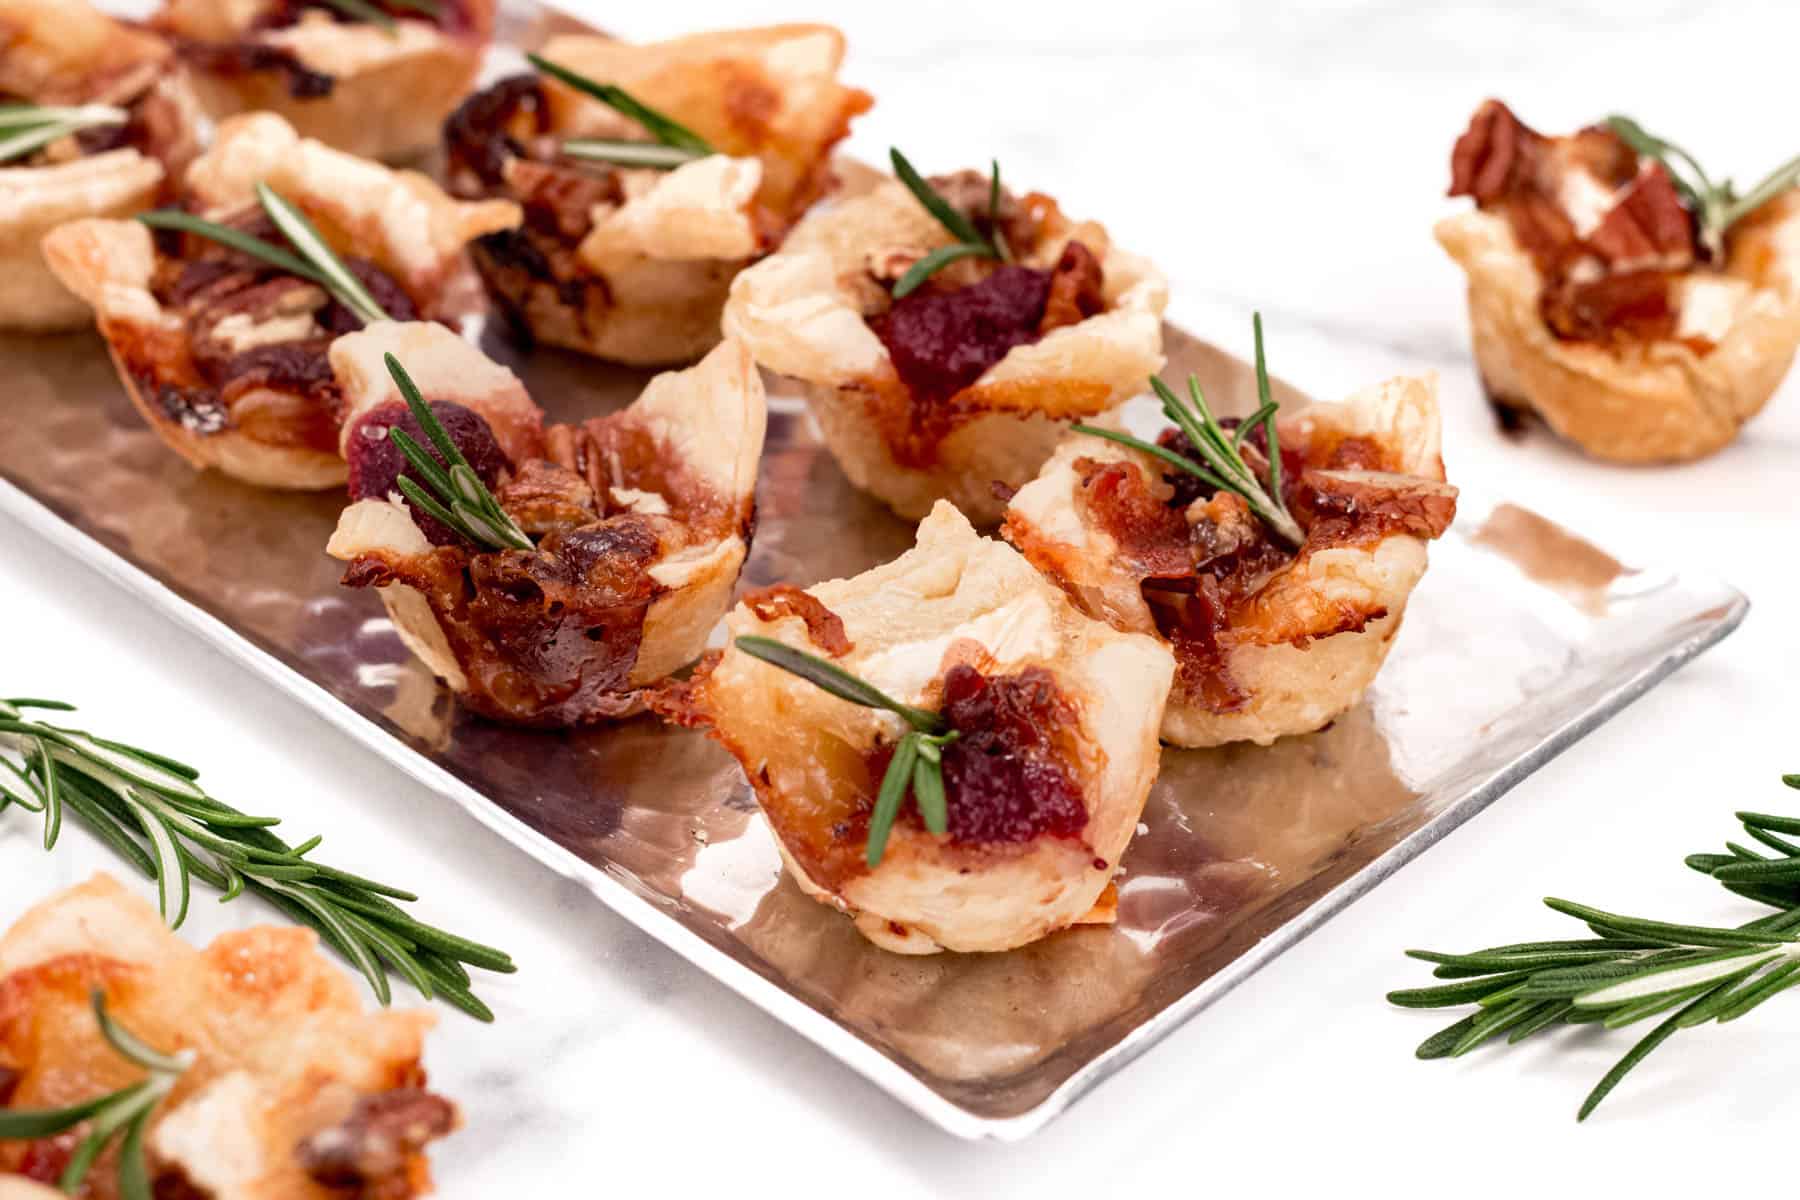 Appetizers with bacon and rosemary sprigs, perfect for Christmas recipes, served on a silver tray.